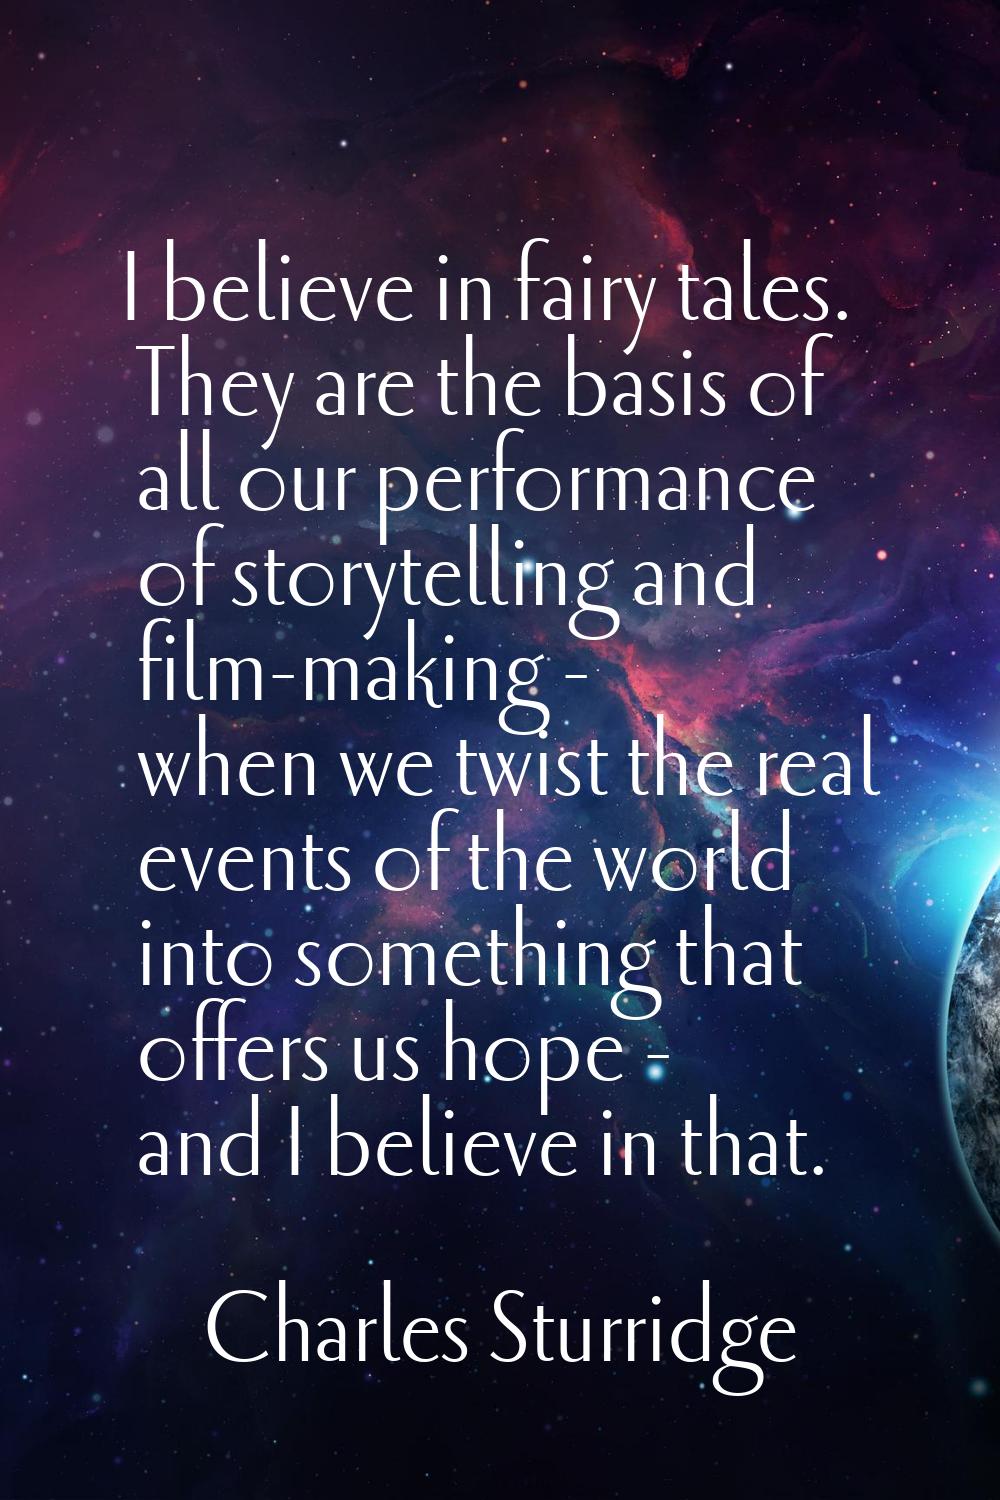 I believe in fairy tales. They are the basis of all our performance of storytelling and film-making